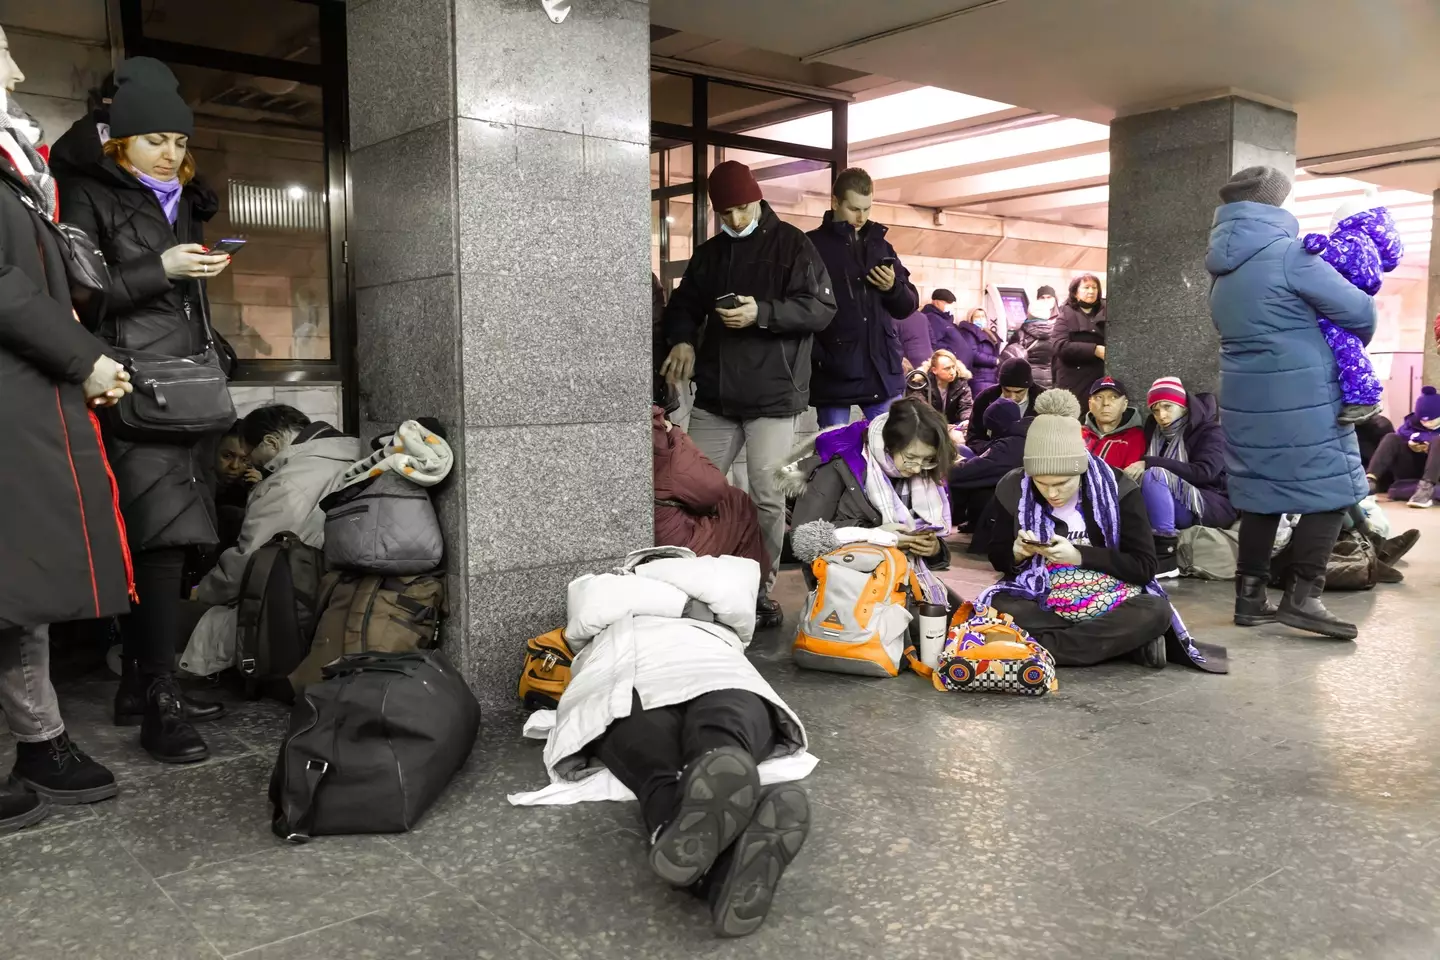 Citizens have been sleeping in subways to avoid bomb attacks.